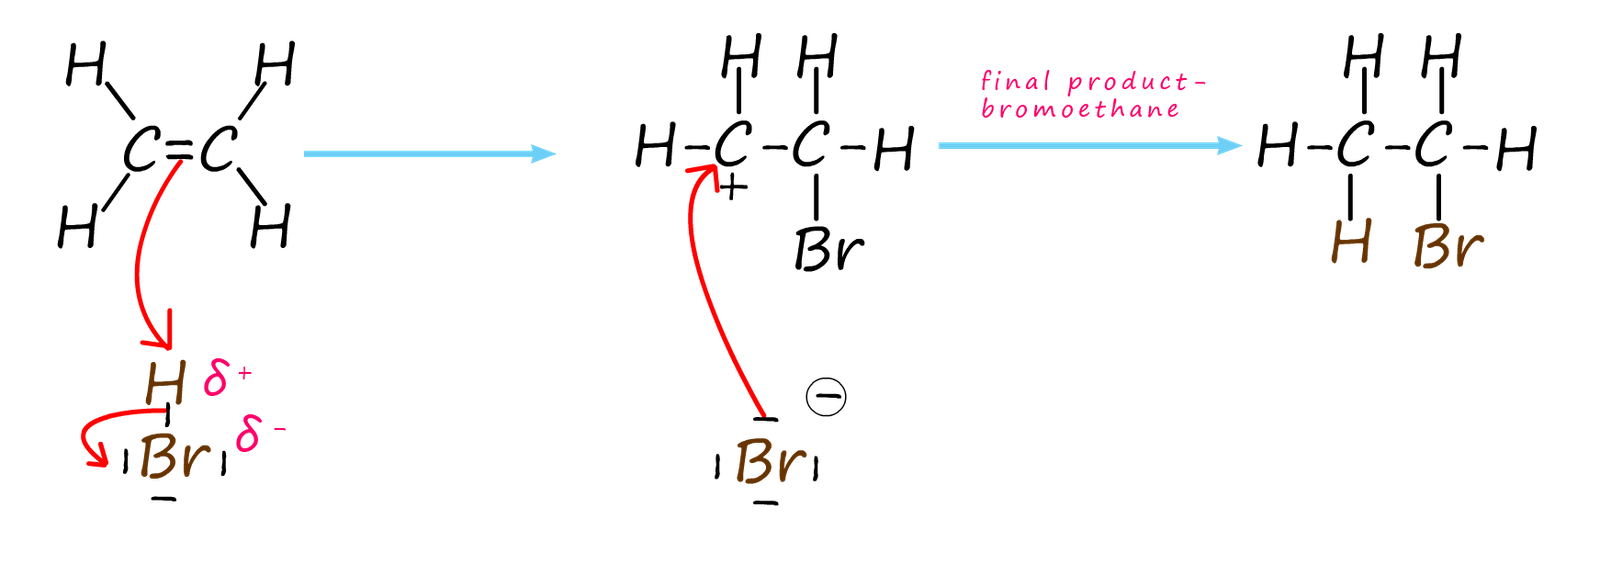 The mechanism to show the electrophilic addition of hydrogen bromide to an alkene.